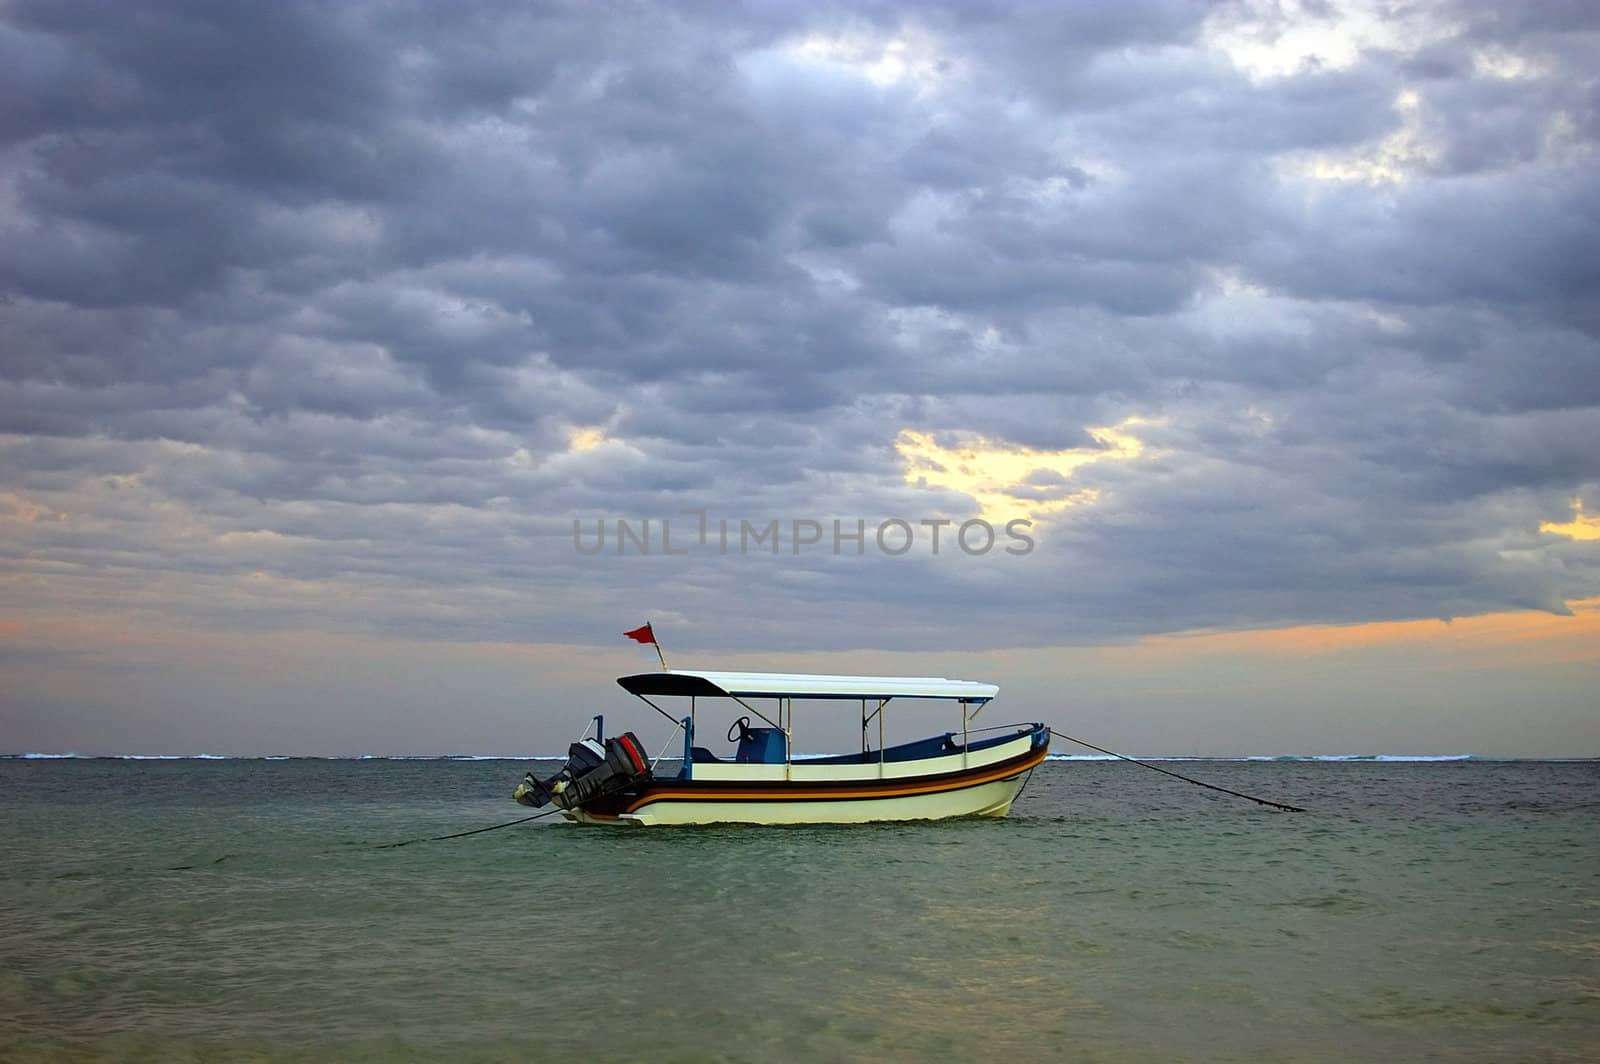 Boat anchored in the Indian ocean, Bali by Komar